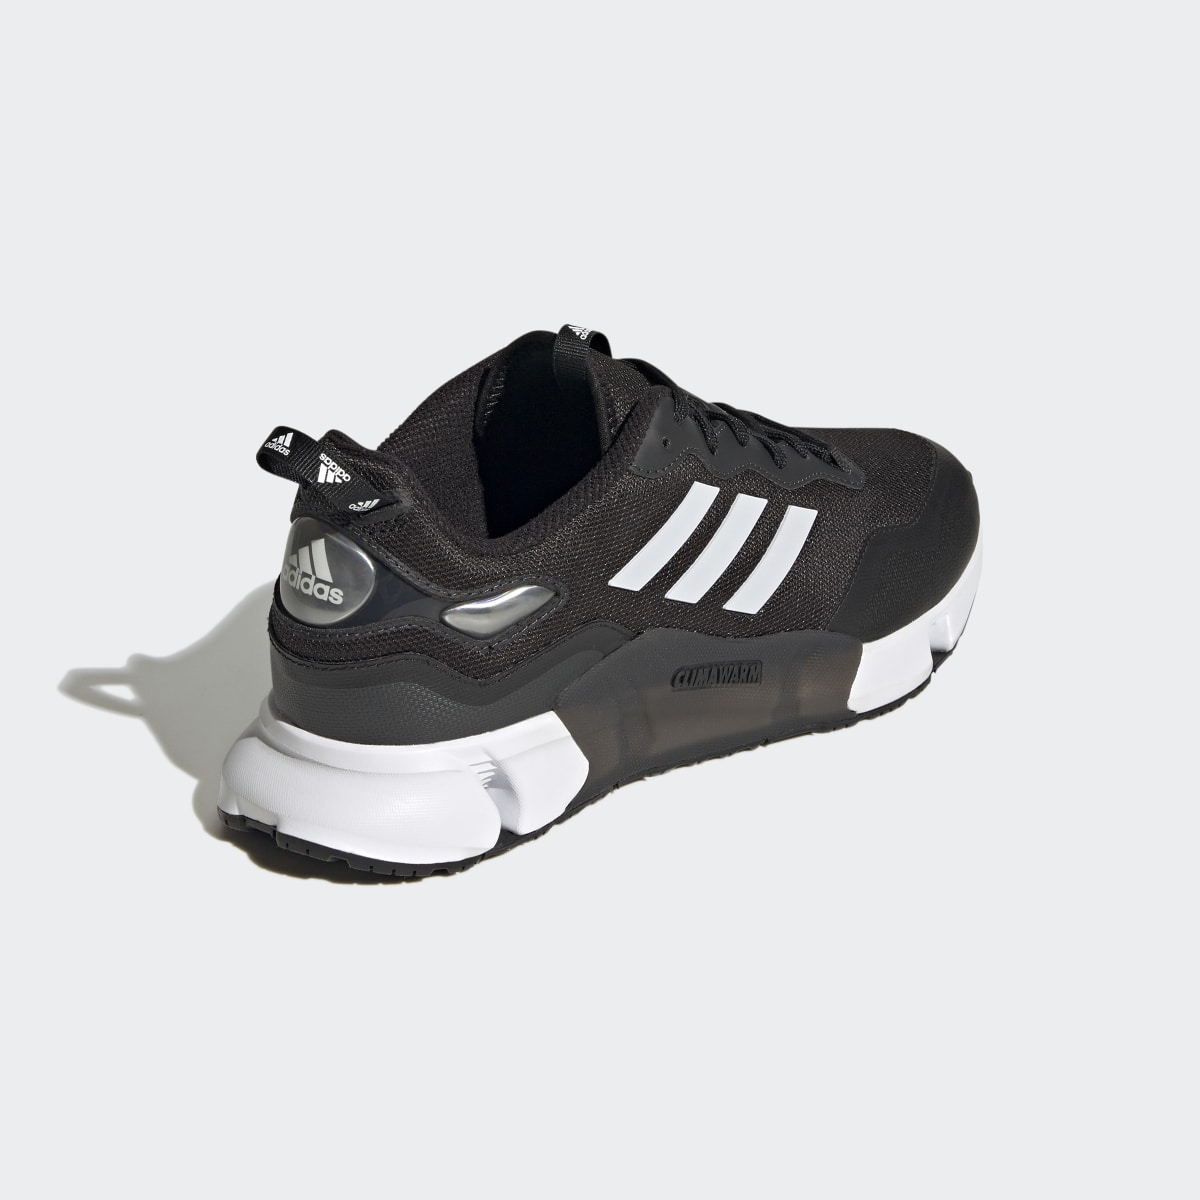 Adidas Climawarm Shoes. 9